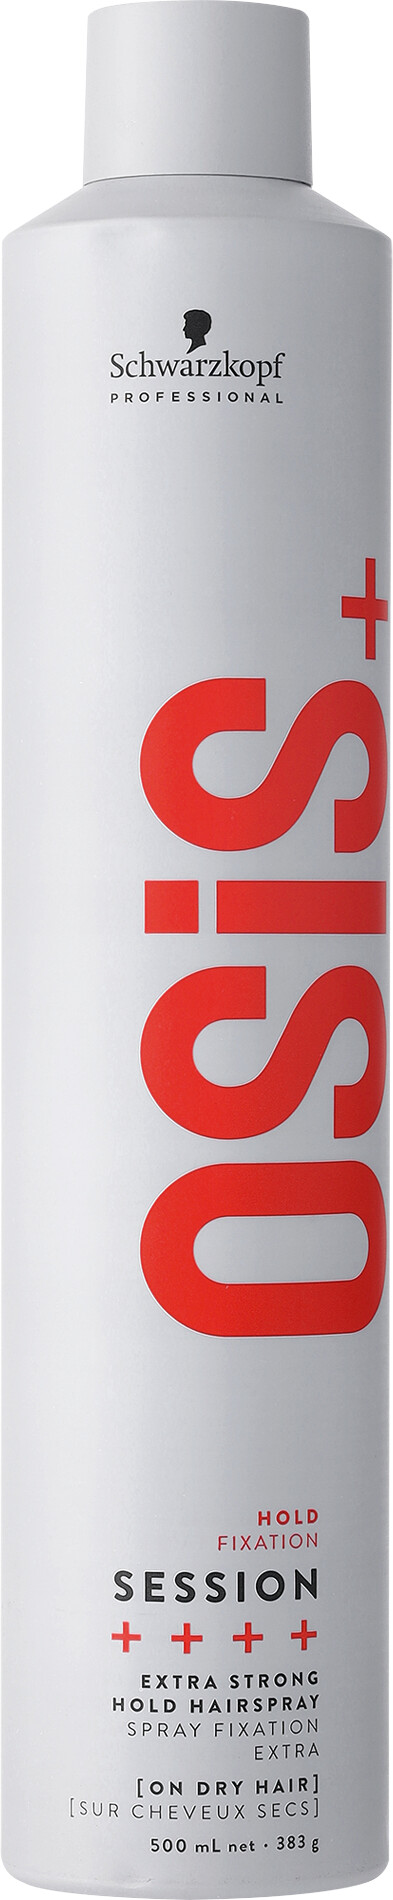 Schwarzkopf Professional Osis+ Session Extra Strong Hold Hairspray 500ml